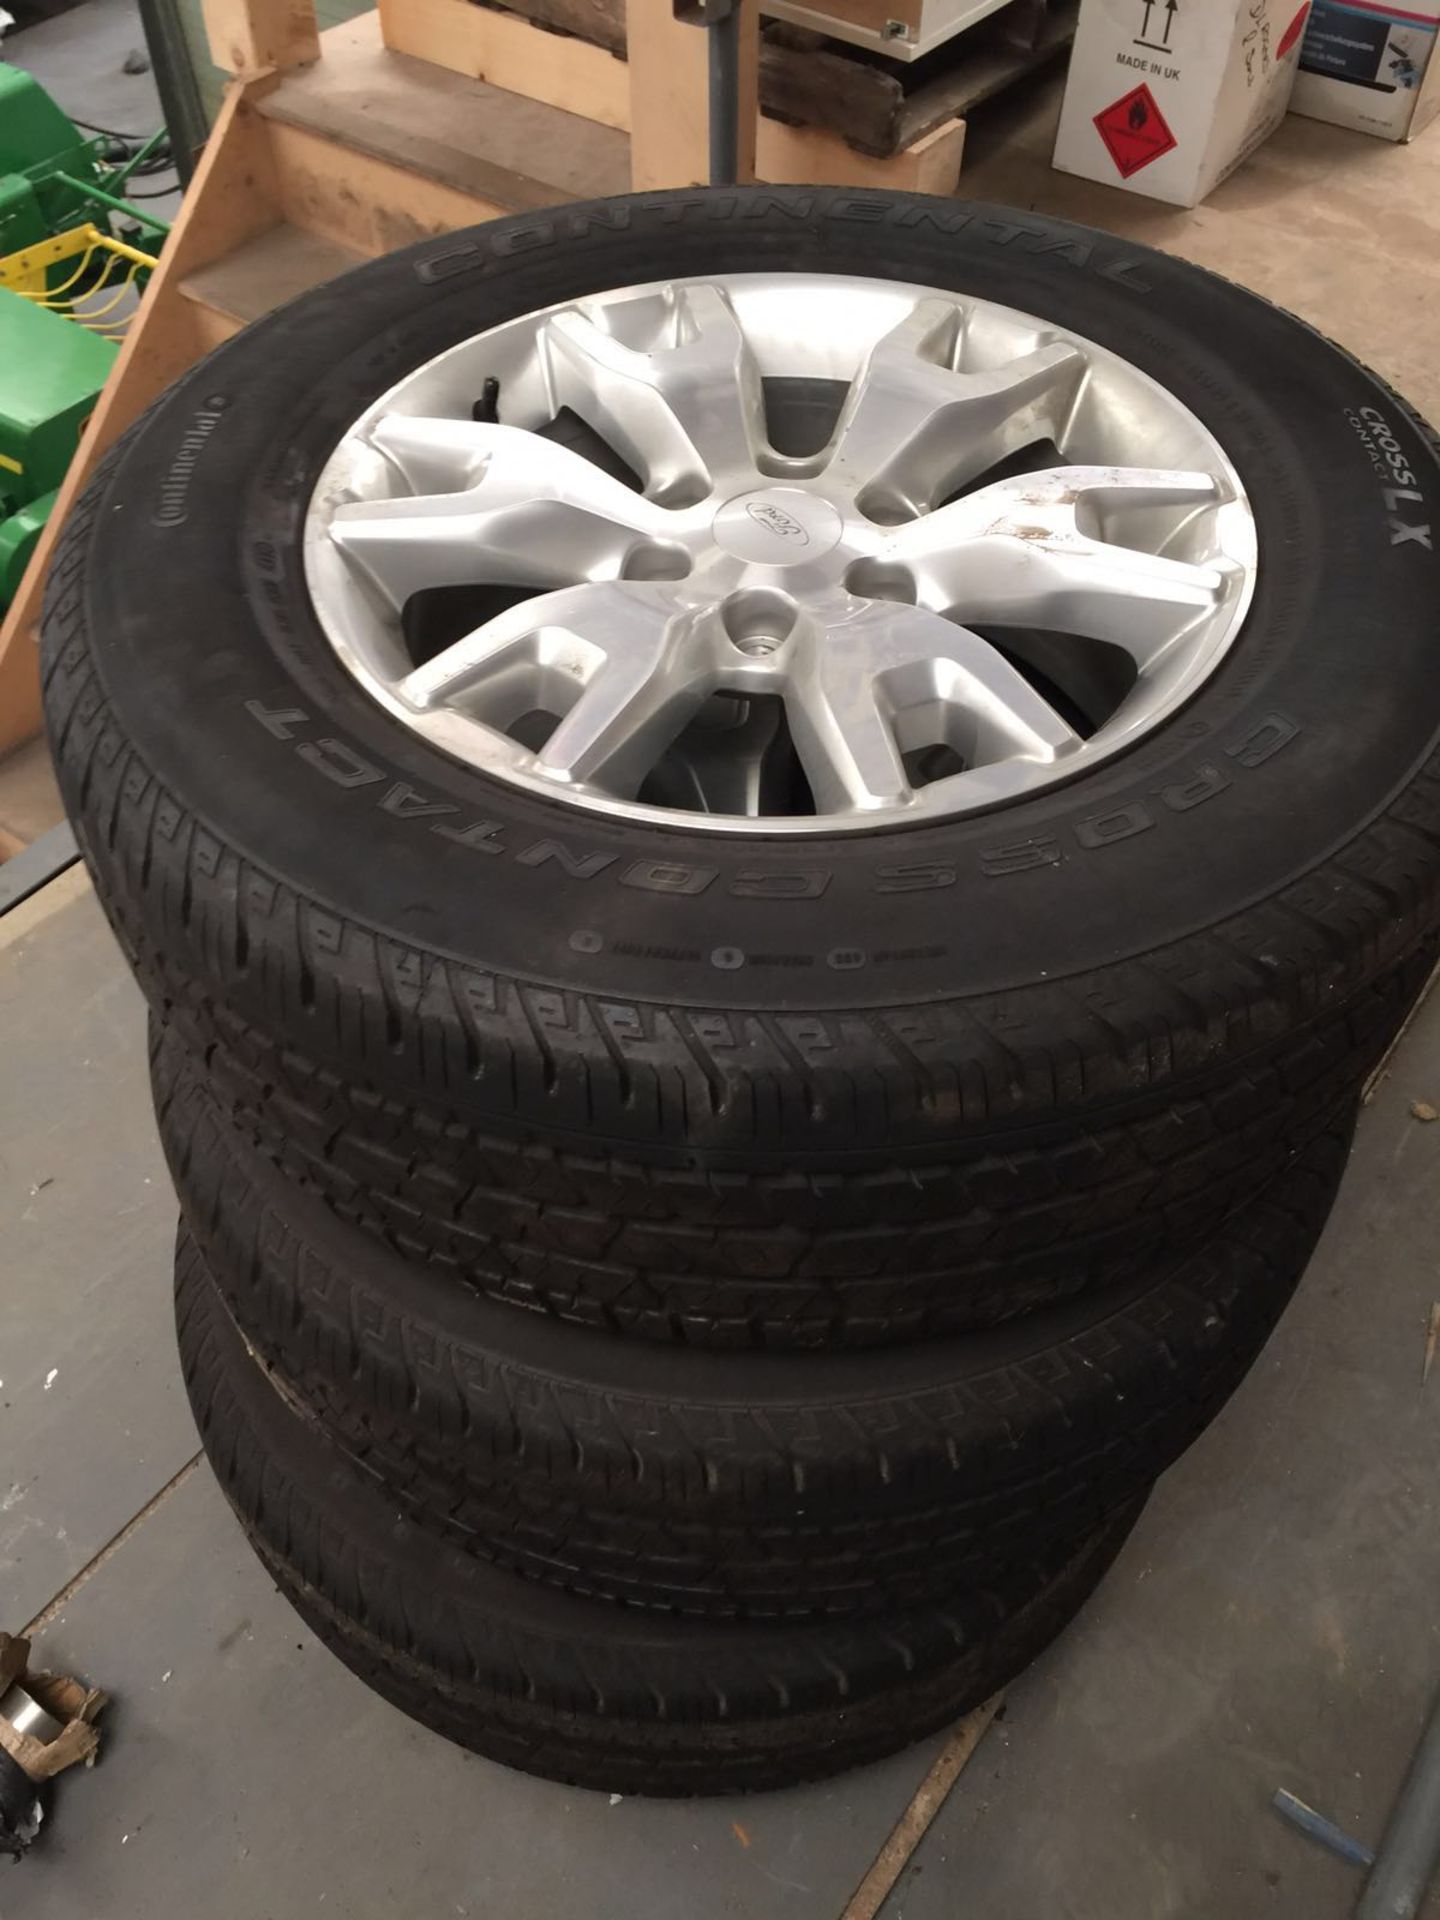 SET OF 4 2016 18" FORD RANGER ALLOY WHEELS WITH CONTINENTAL CROSS CONTACT TYRES ONLY 100 MILES - Bild 3 aus 5